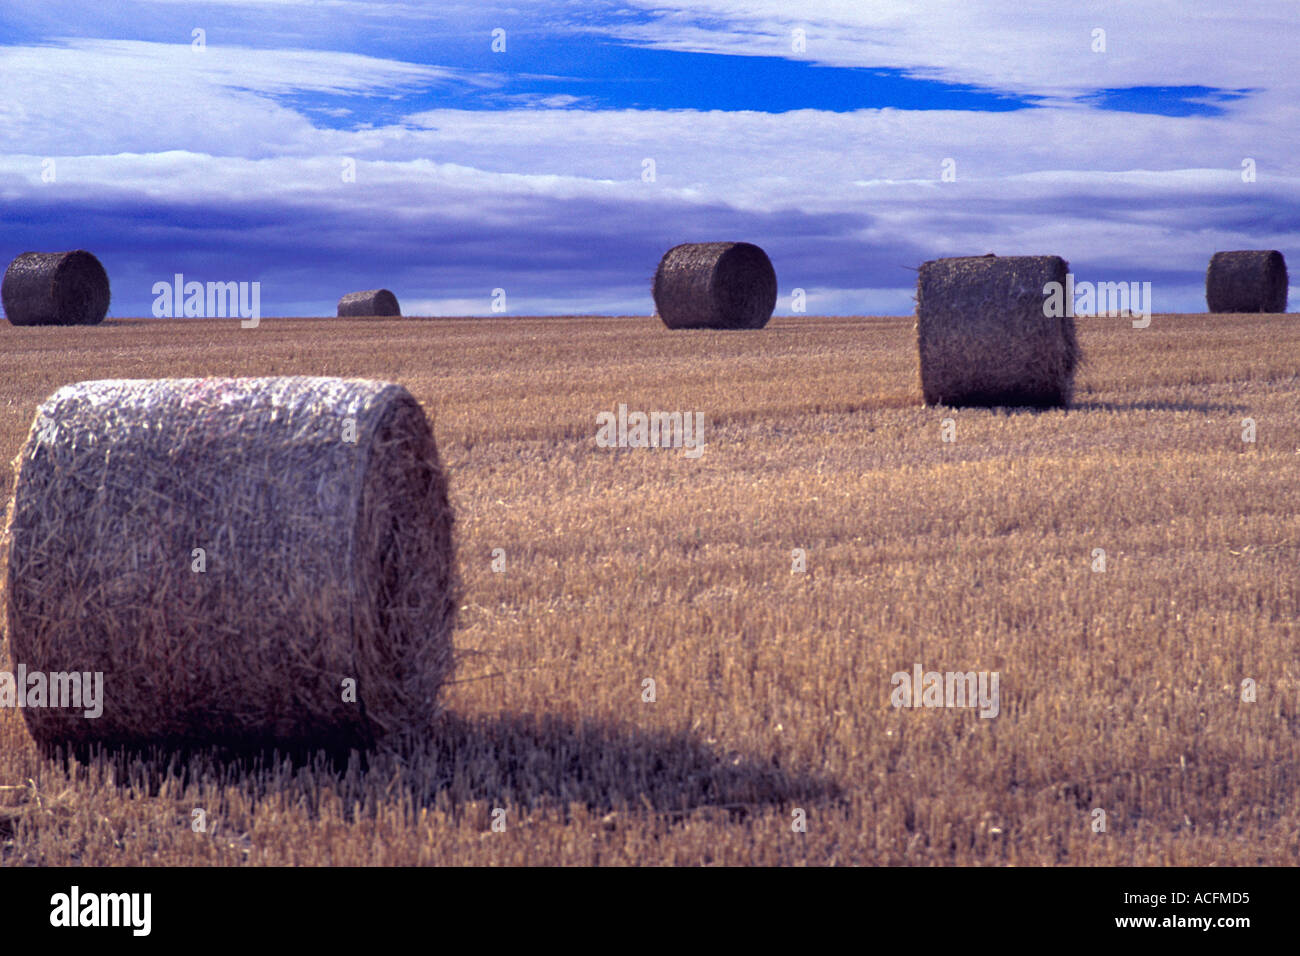 Field of bails on an uphill incline against a blue cloudy sky Stock Photo